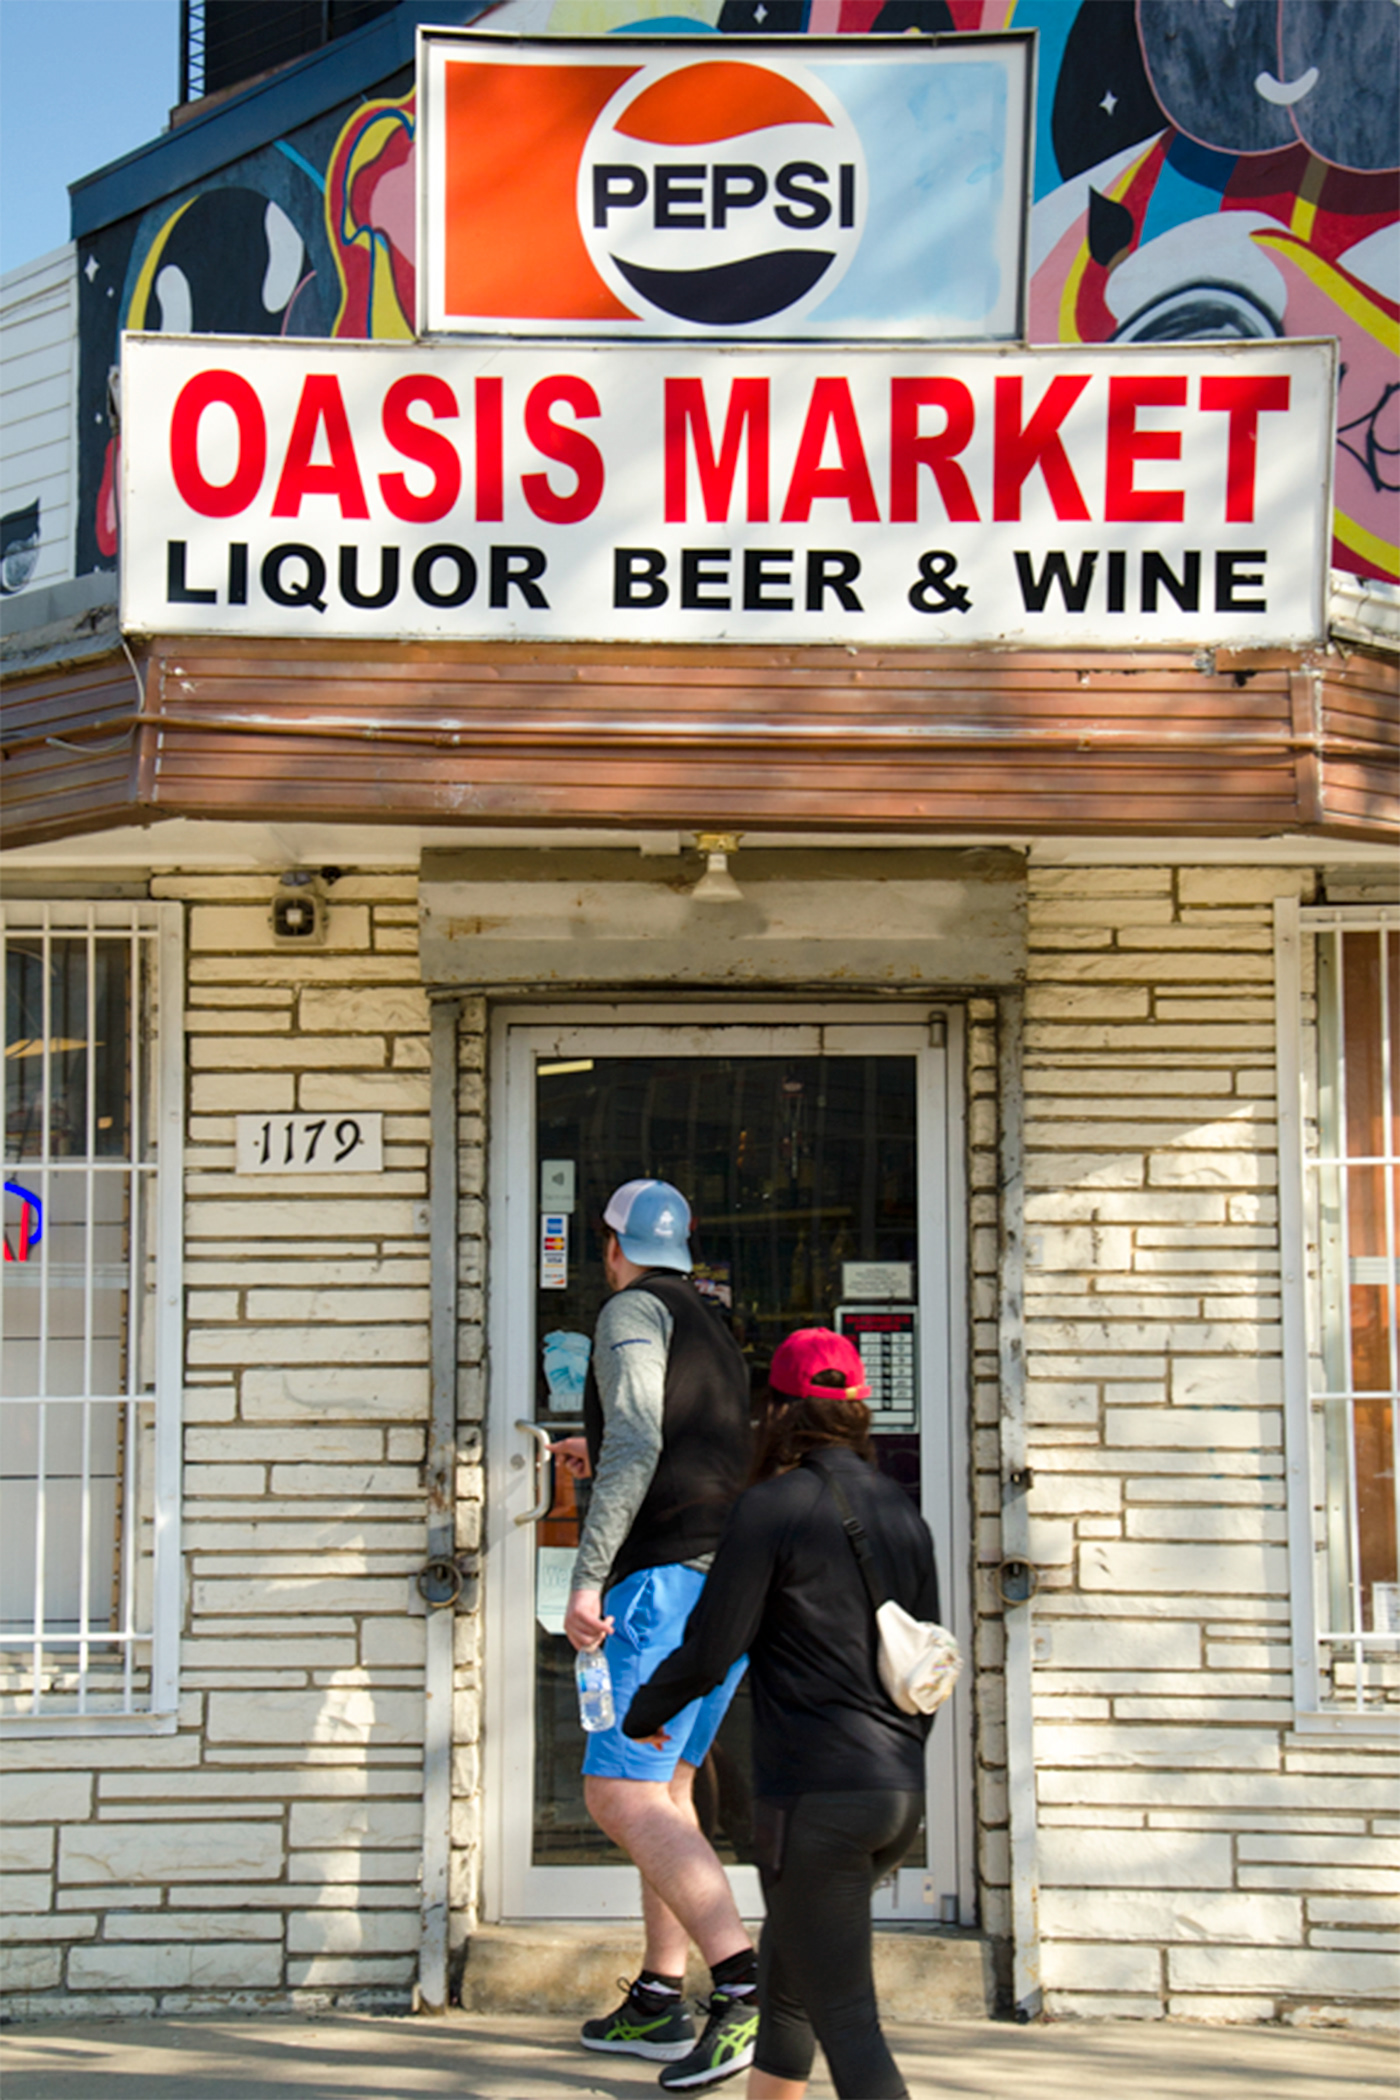 Liquor stores remain open in Washington, D.C., during the coronavirus pandemic. They are deemed essential business operations by local officials. (Joseph Young)